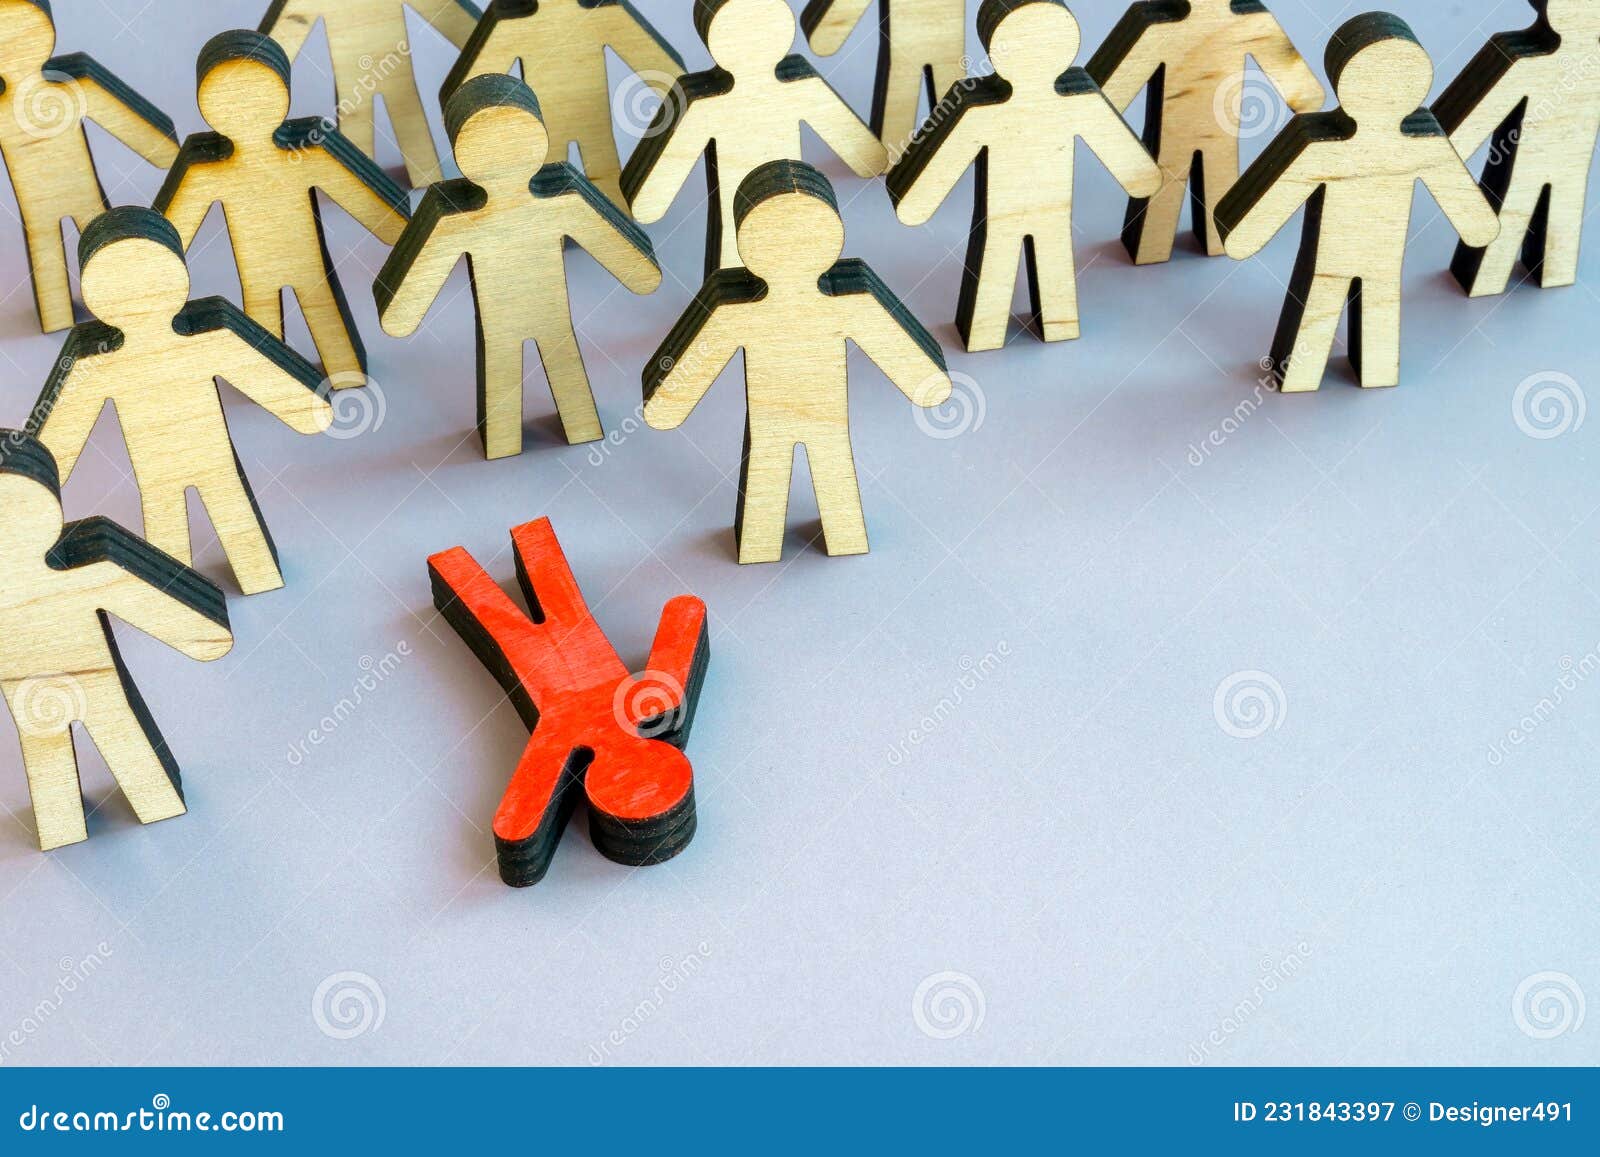 the figurine lies in the crowd. burnout at work or physical or emotional exhaustion.